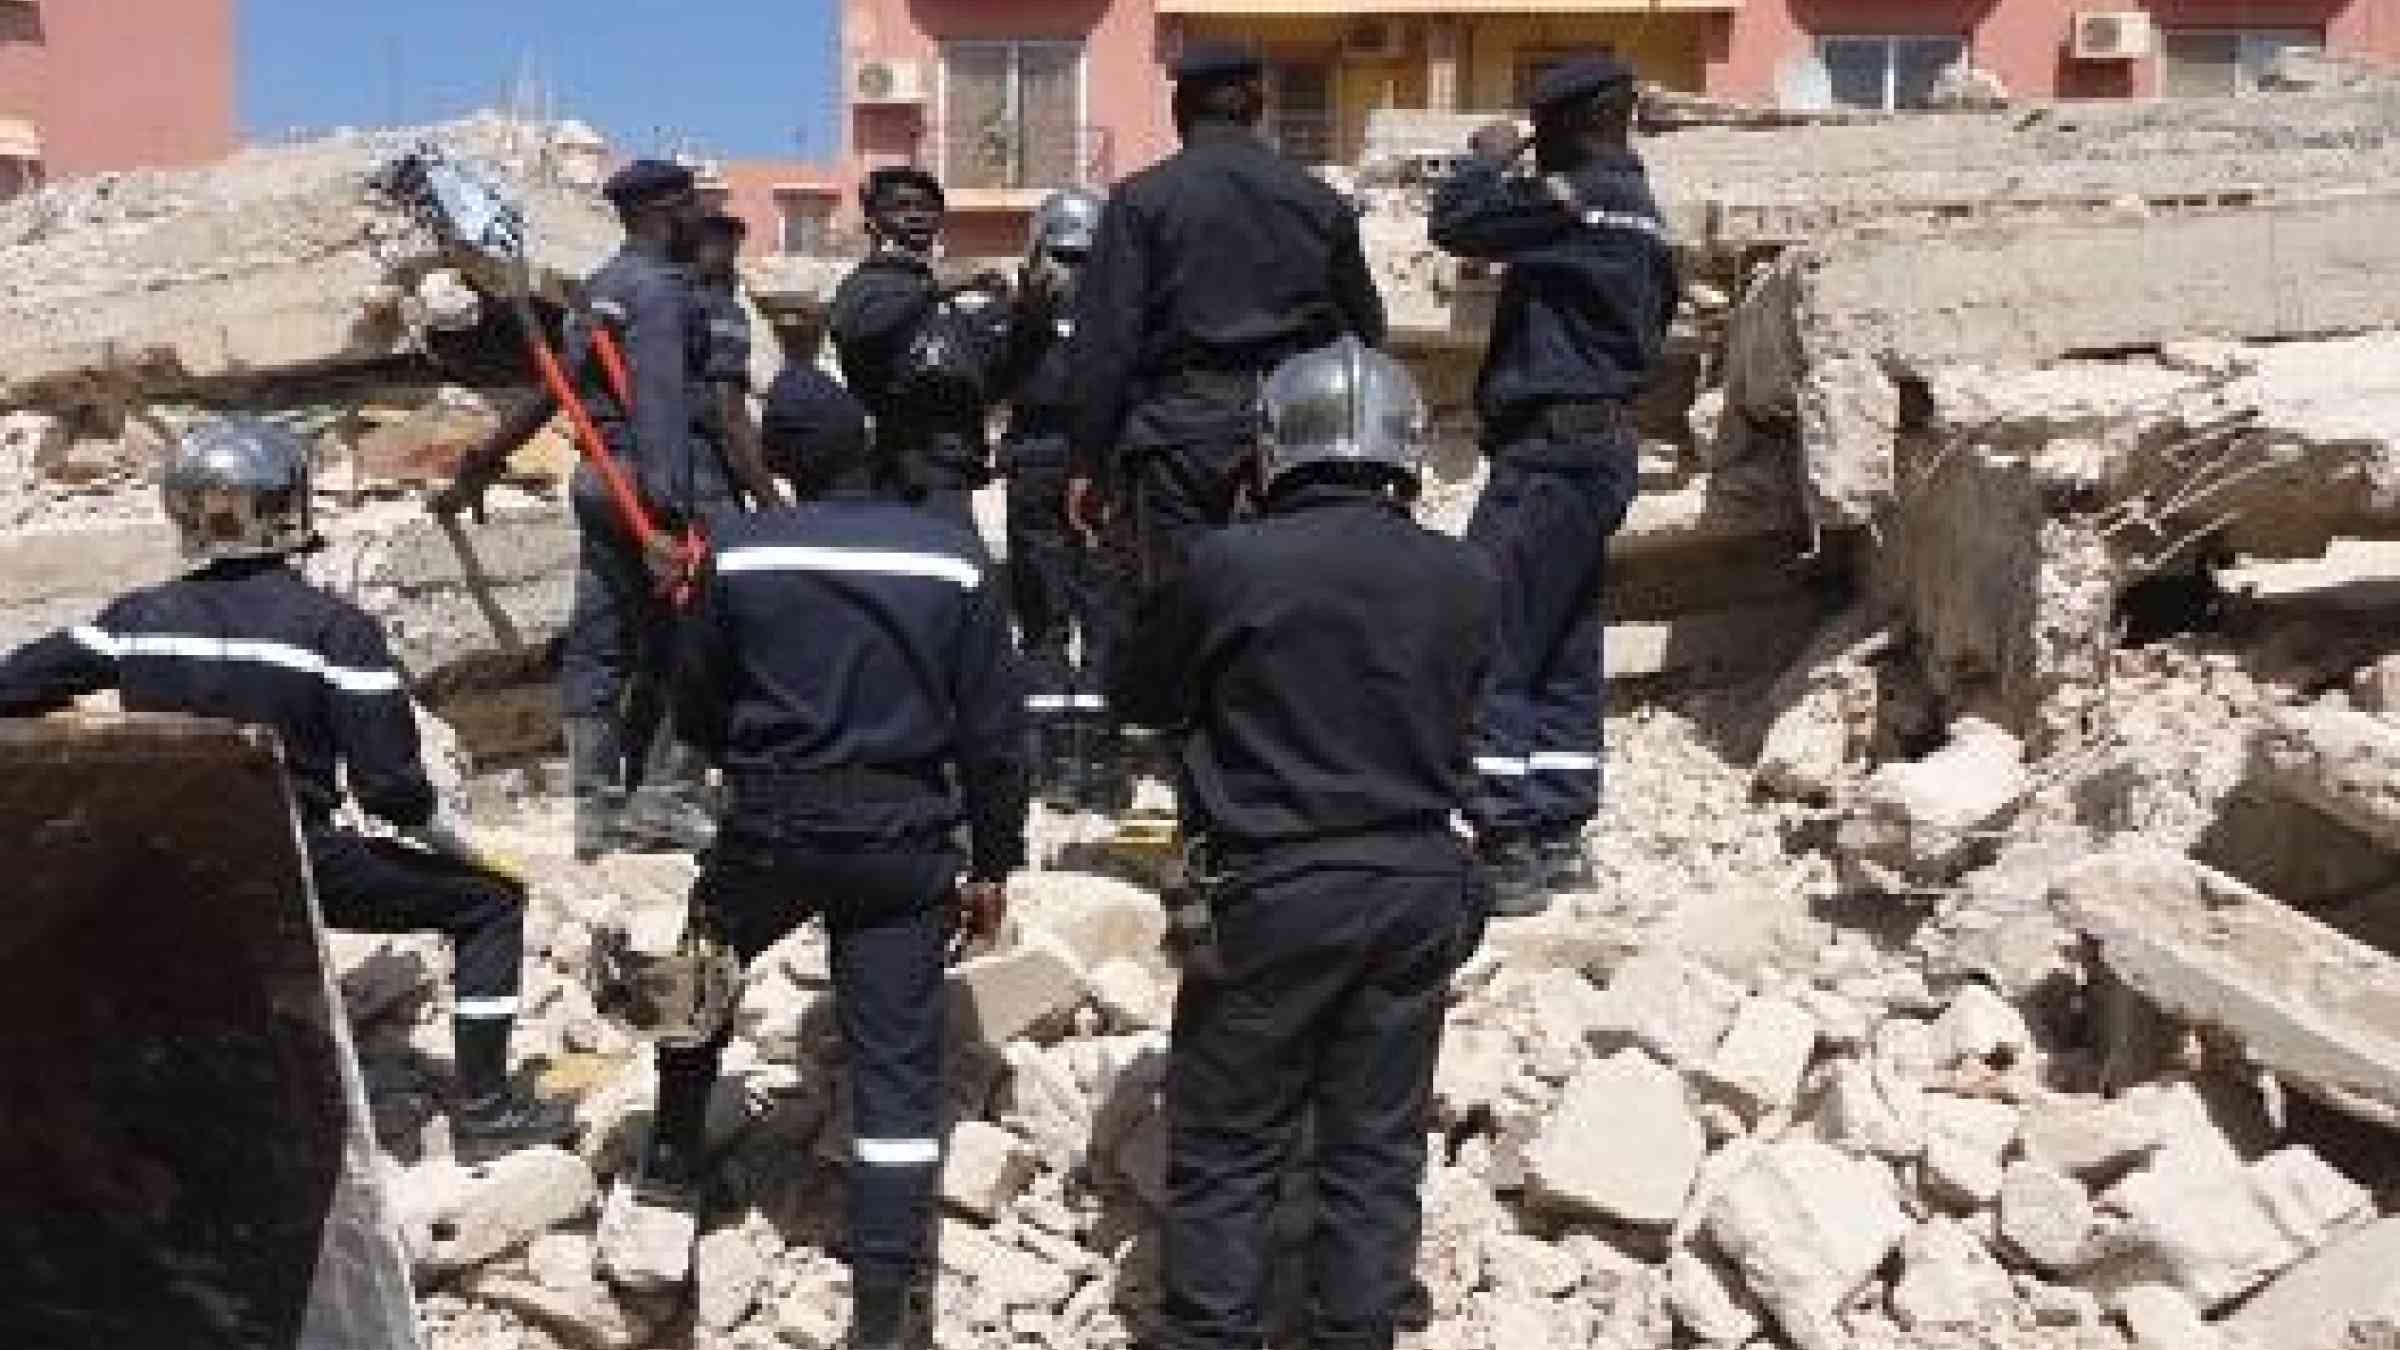 Authorities inspect rubble at a collapsed building in Dakar (Photo: DPC)